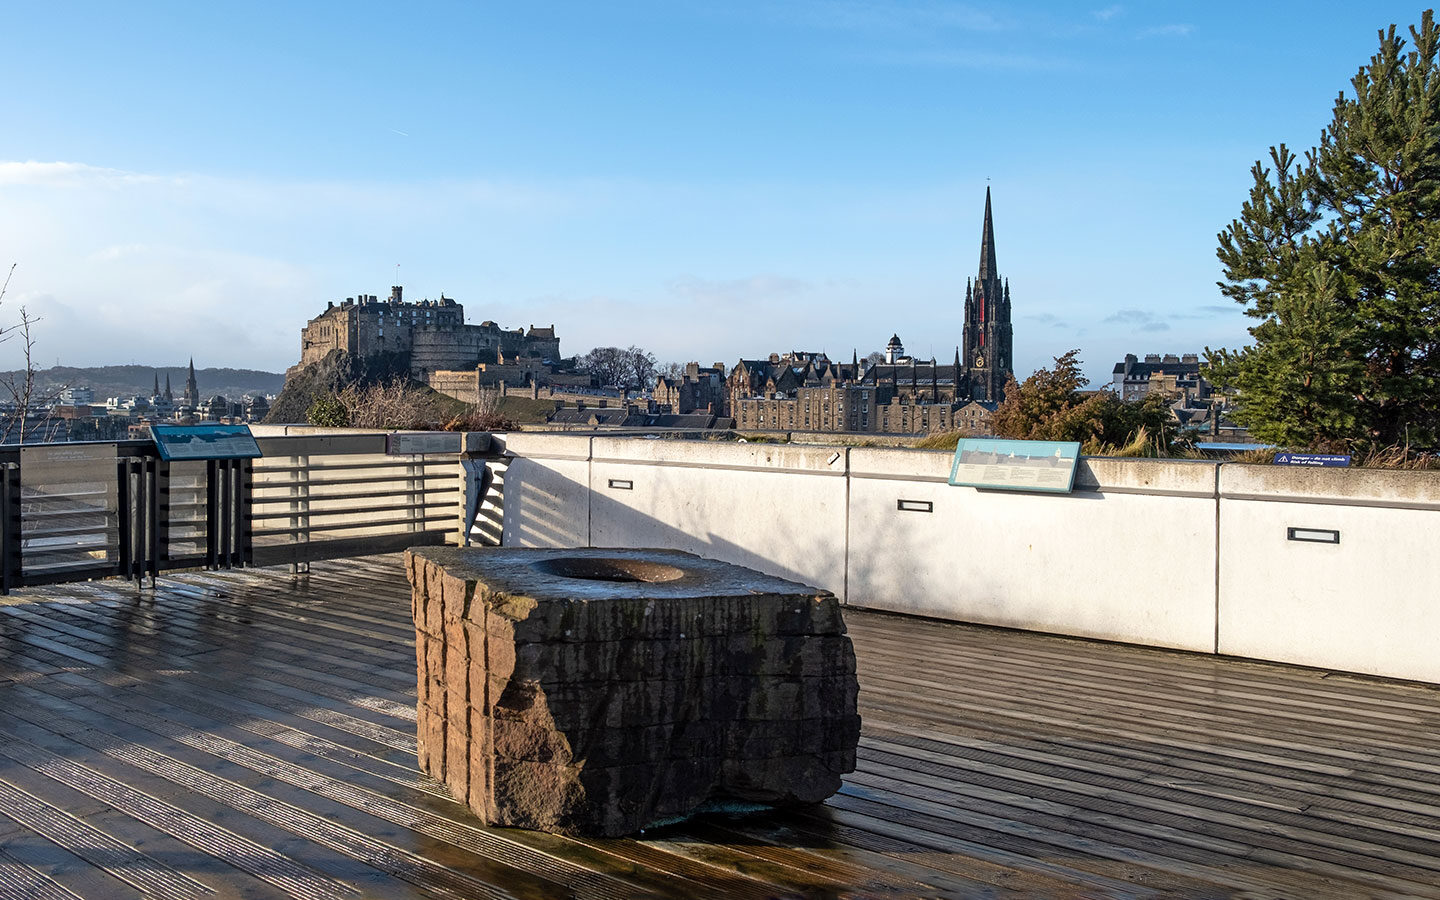 Free city views from the rooftop at the National Museum of Scotland